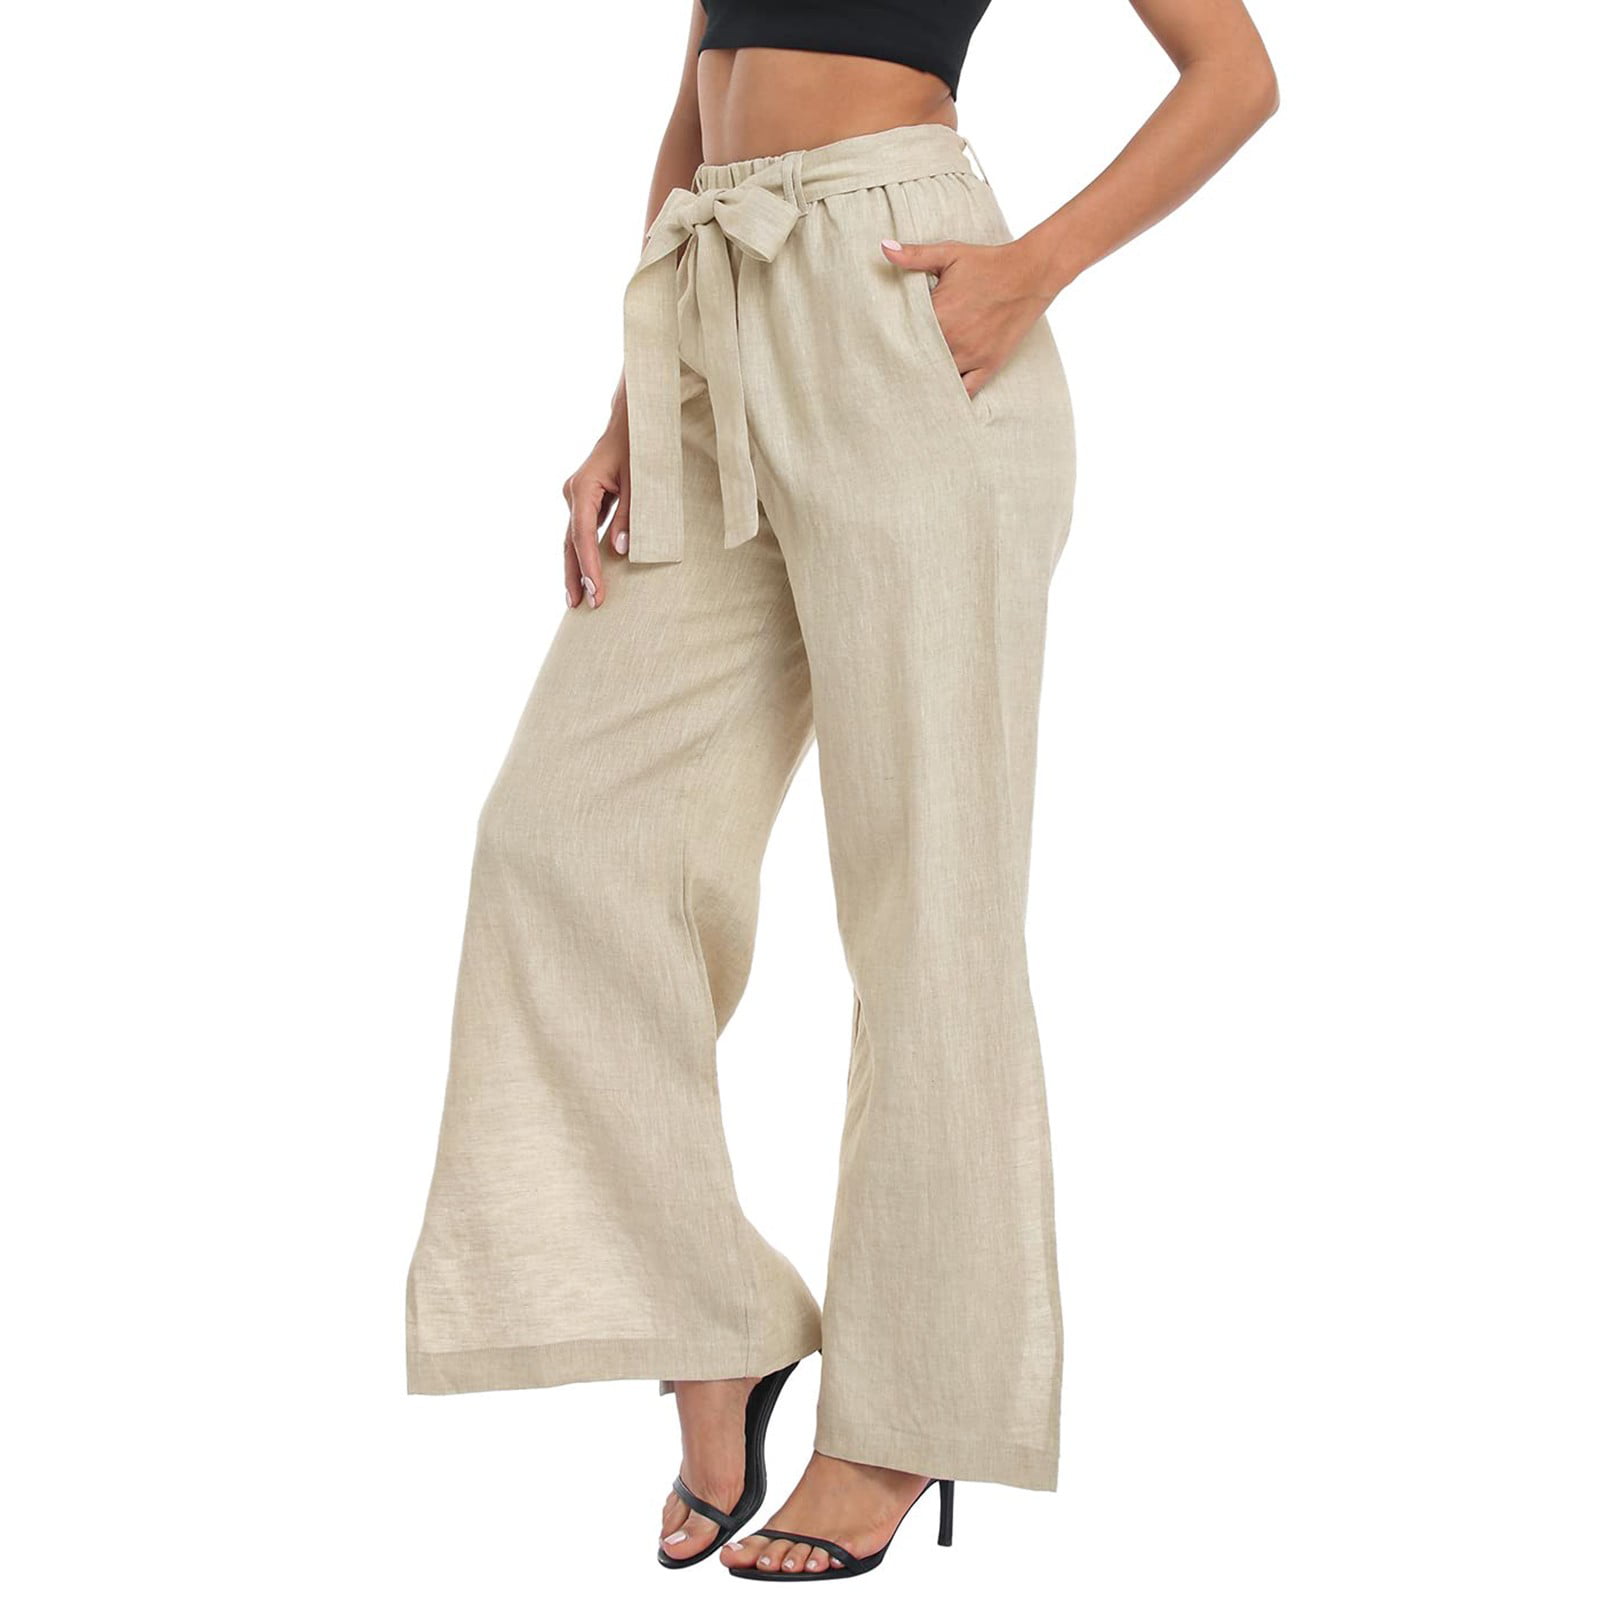  Womens Casual Summer Pants Drawstring Loose Fit Cropped Pants  Straight Elastic Waist Lounge Pants with Pockets pant adjuster waist smaller  newspaper pants dress stretch twill cropped wide leg pants : 服裝，鞋子和珠寶